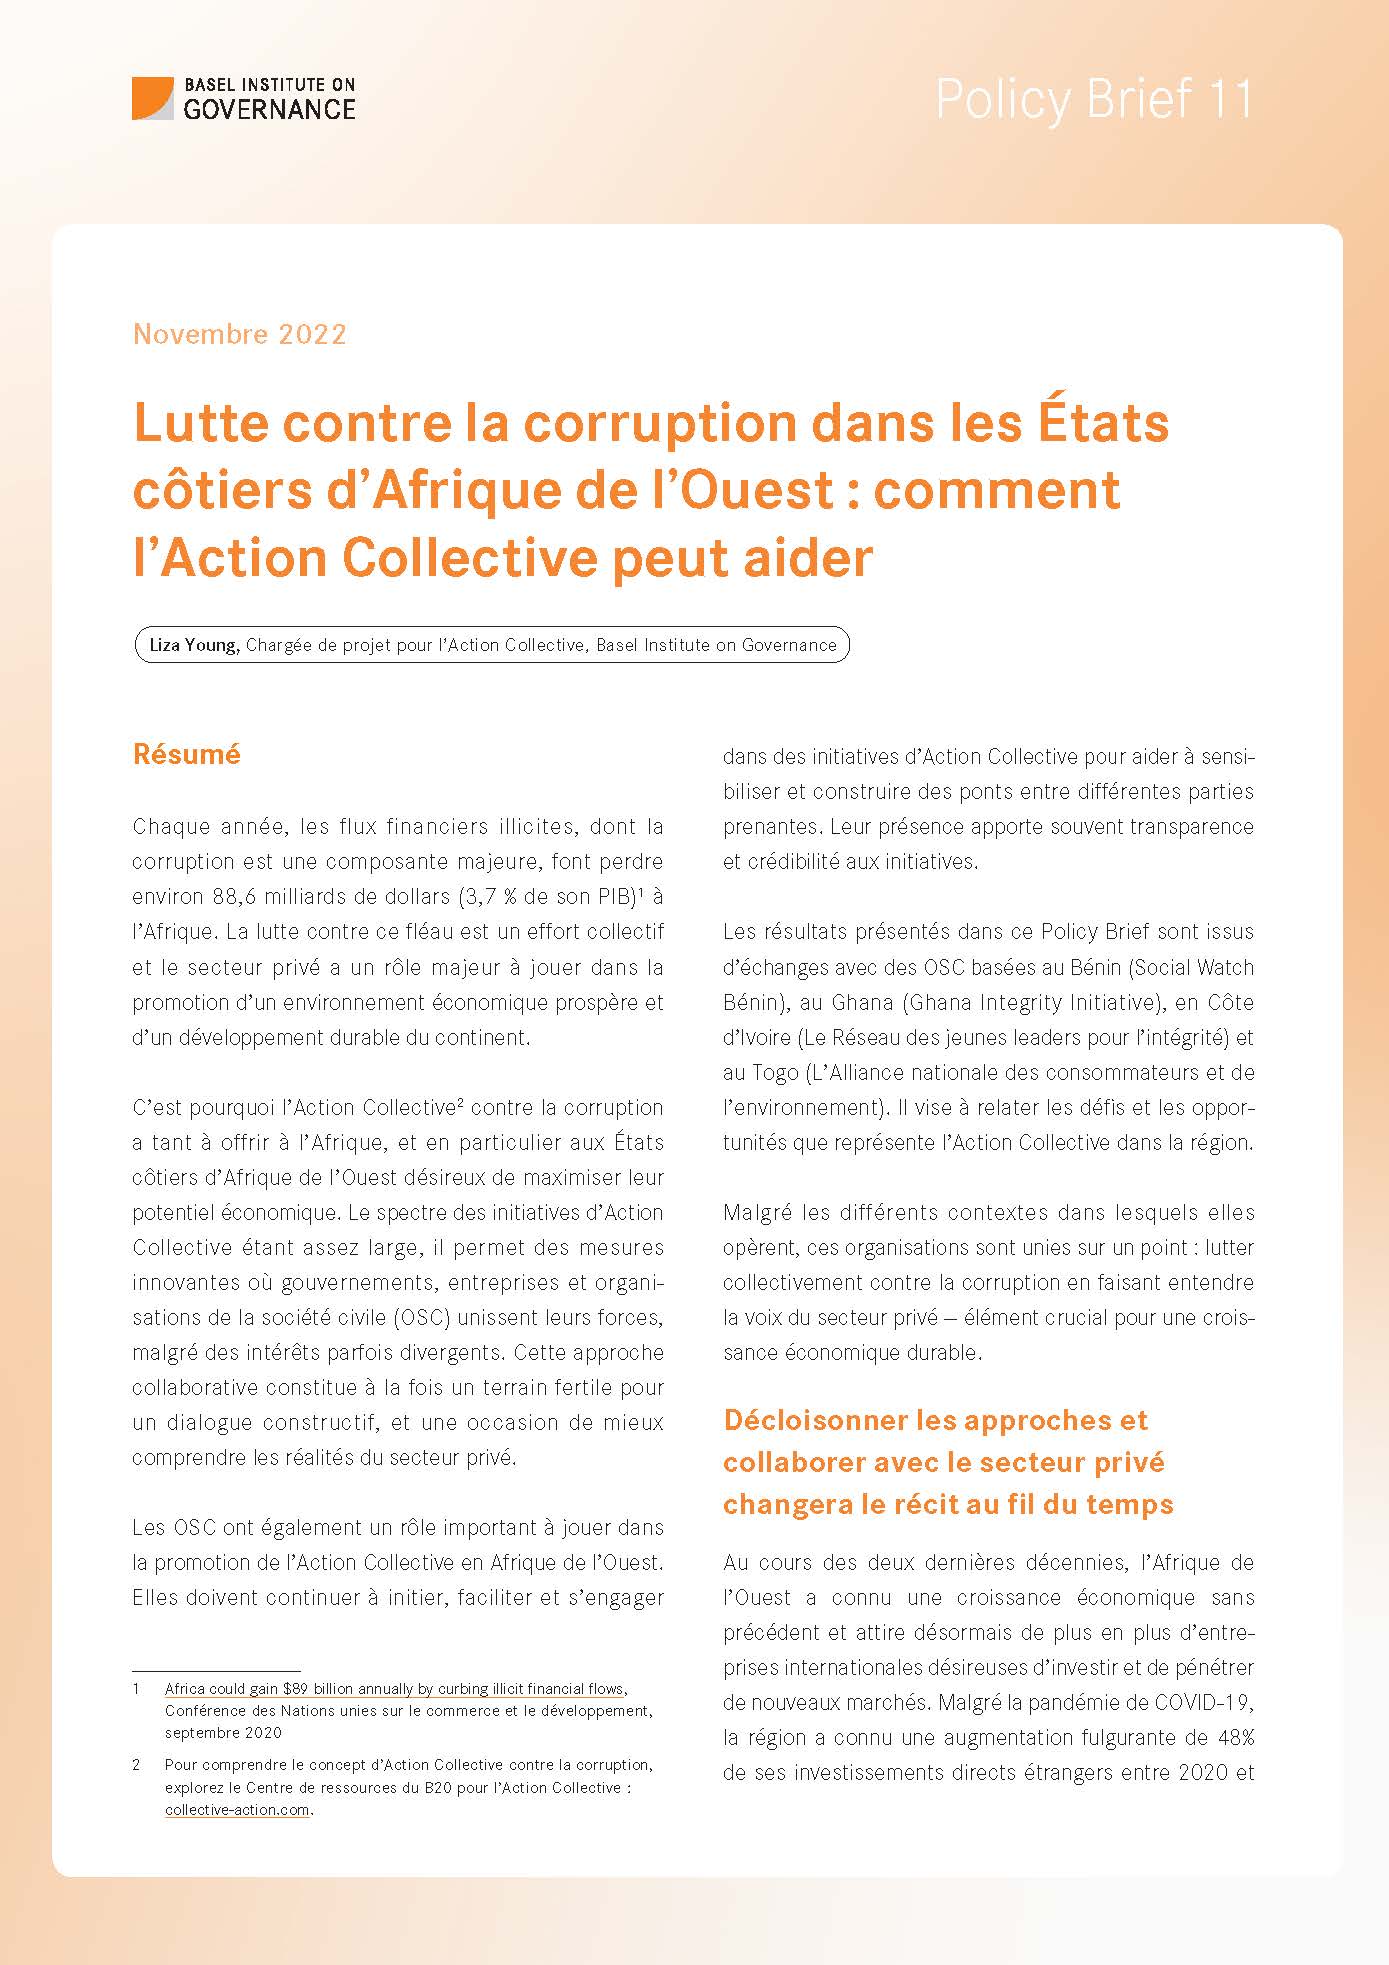 Policy Brief 11 French